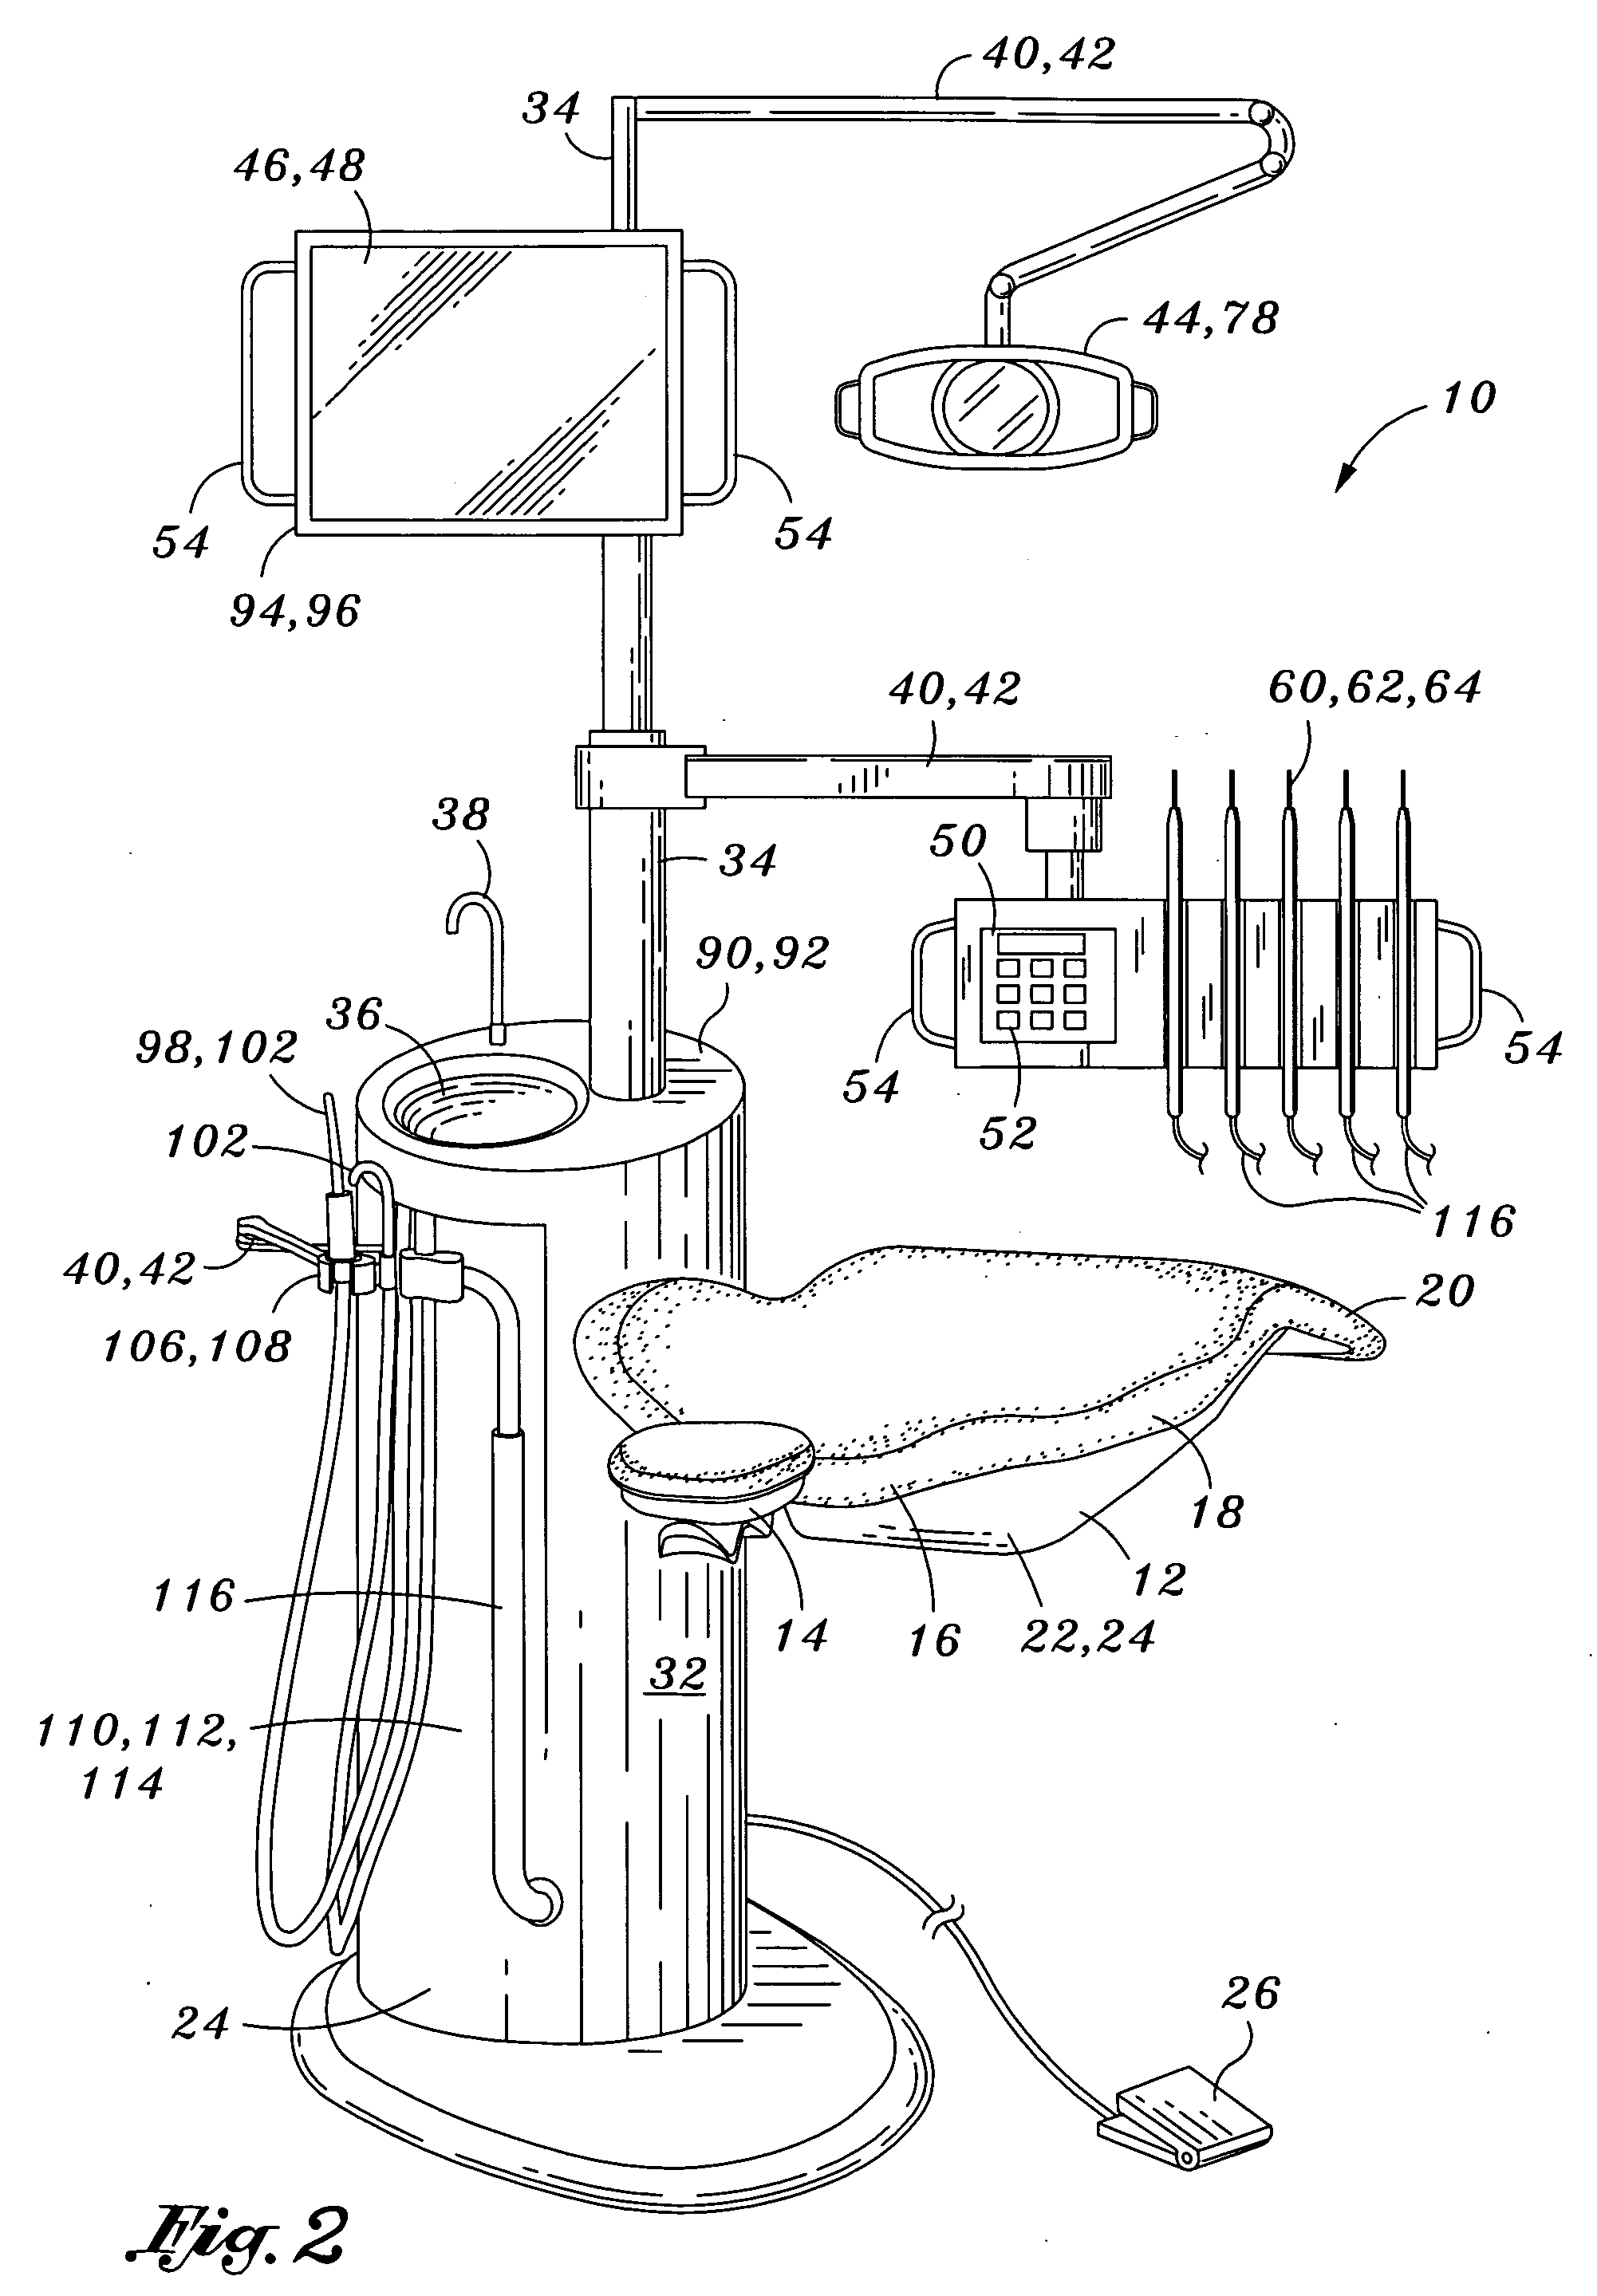 Dental imaging system and method of use